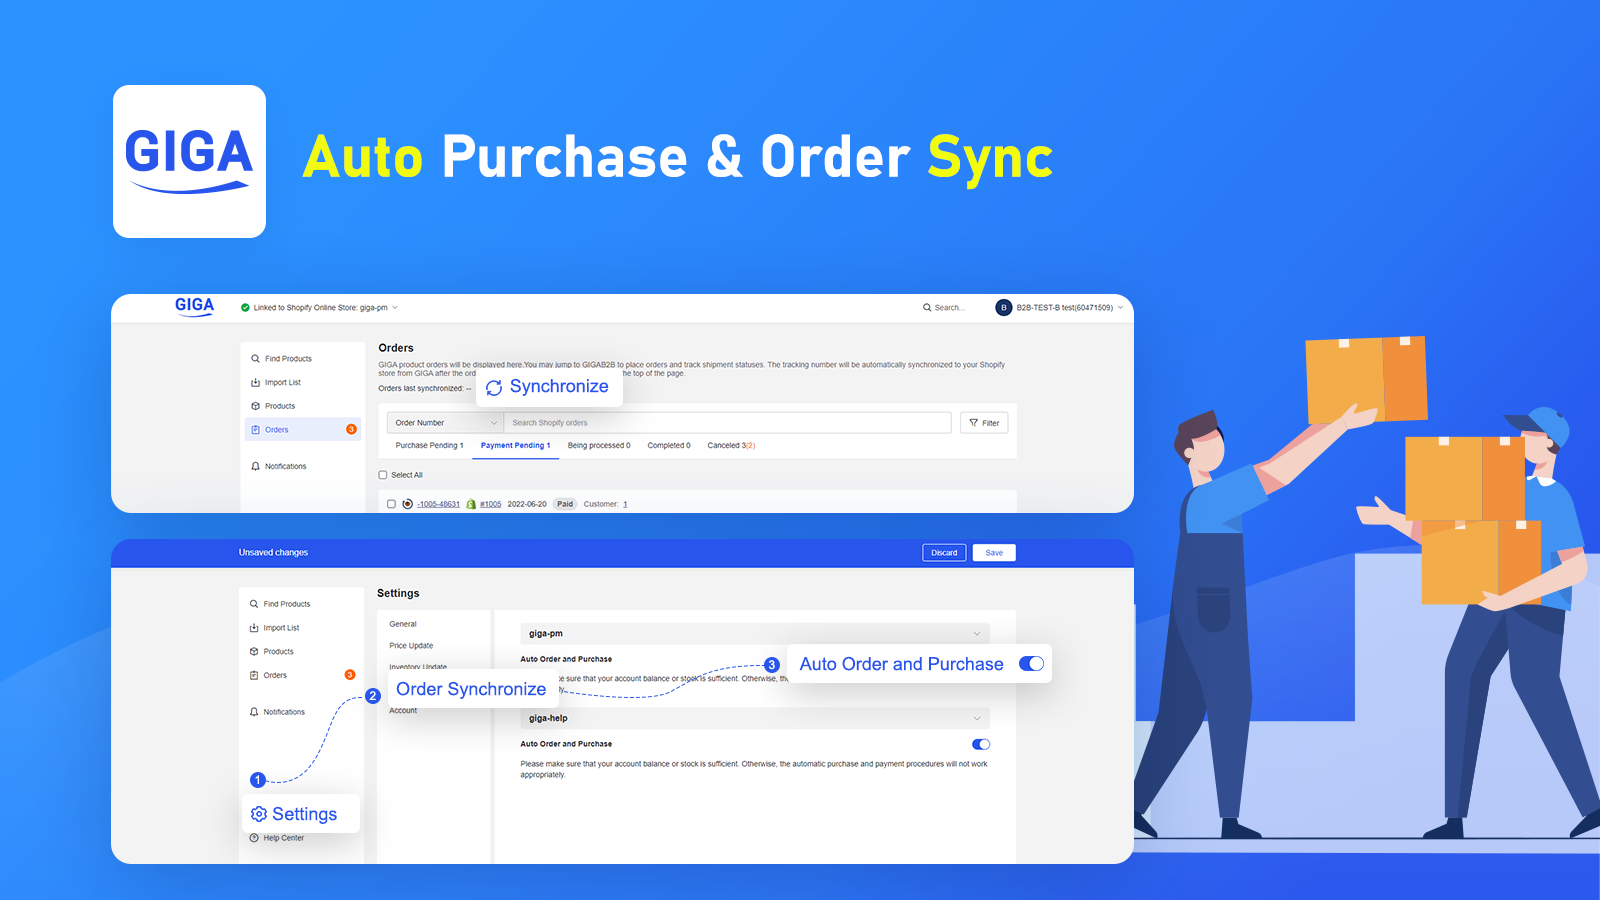 Auto Purchase & Order Sync